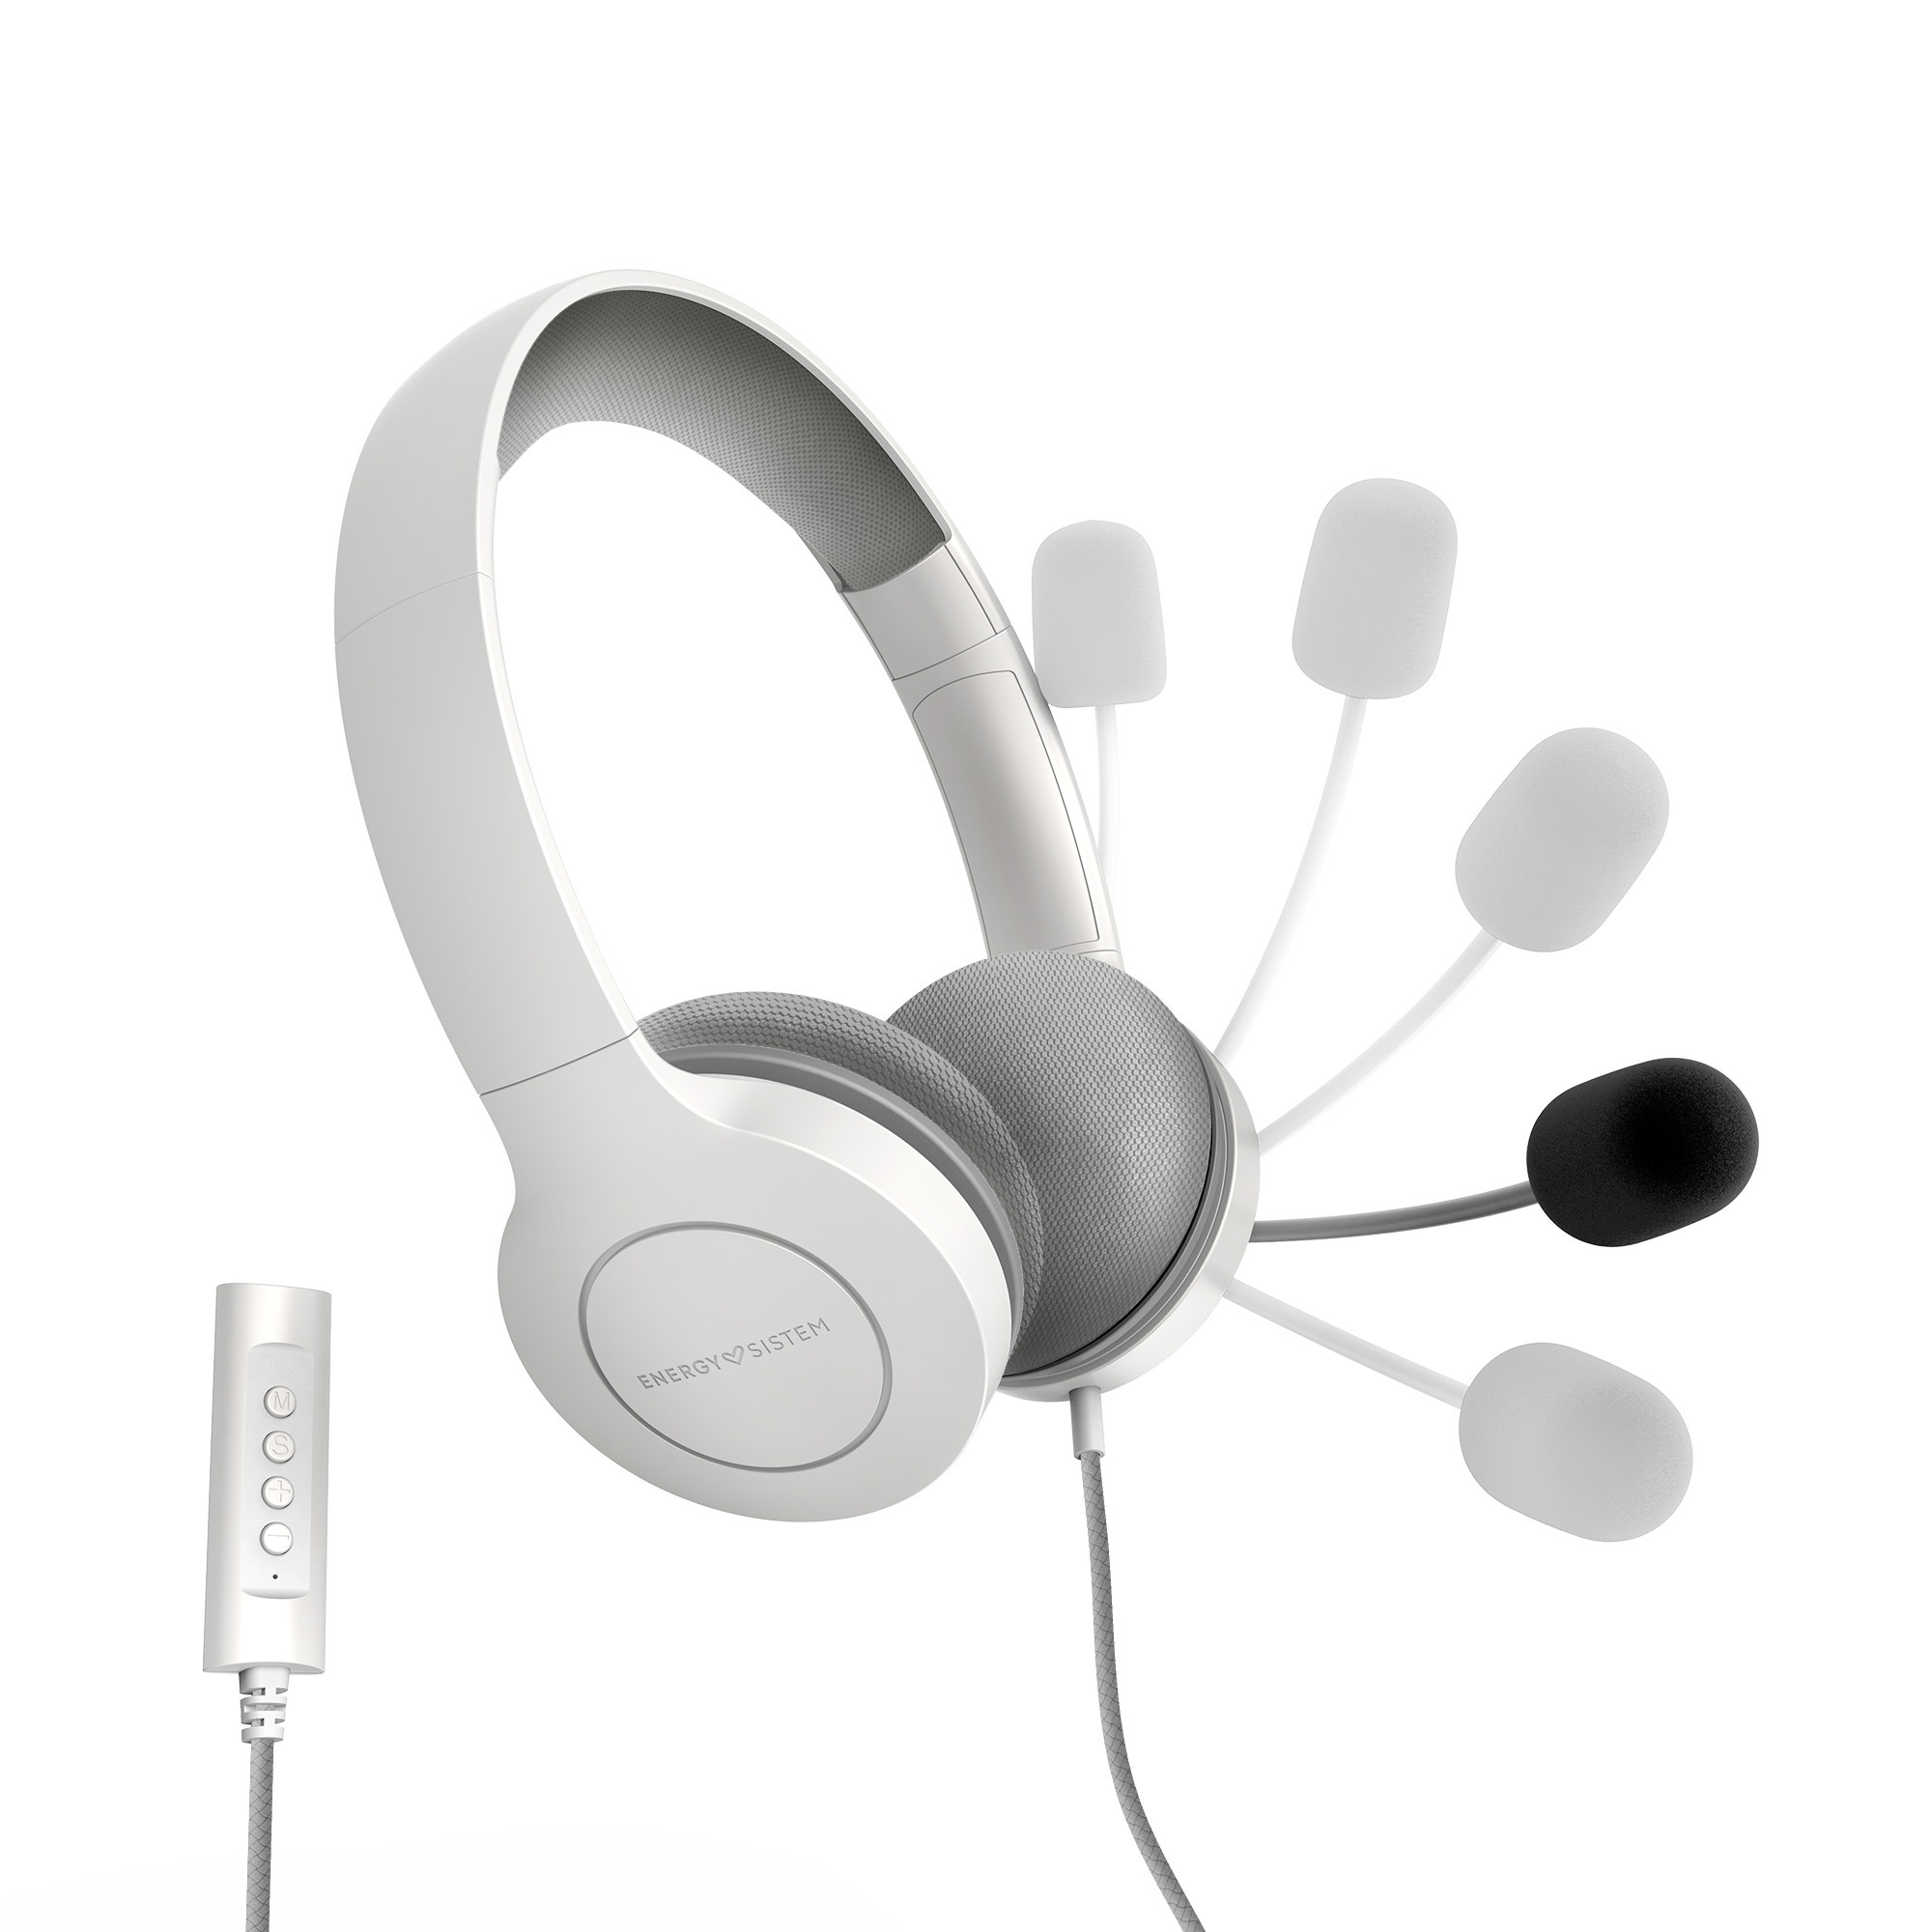 Stereo headset with retractable mic to work from home